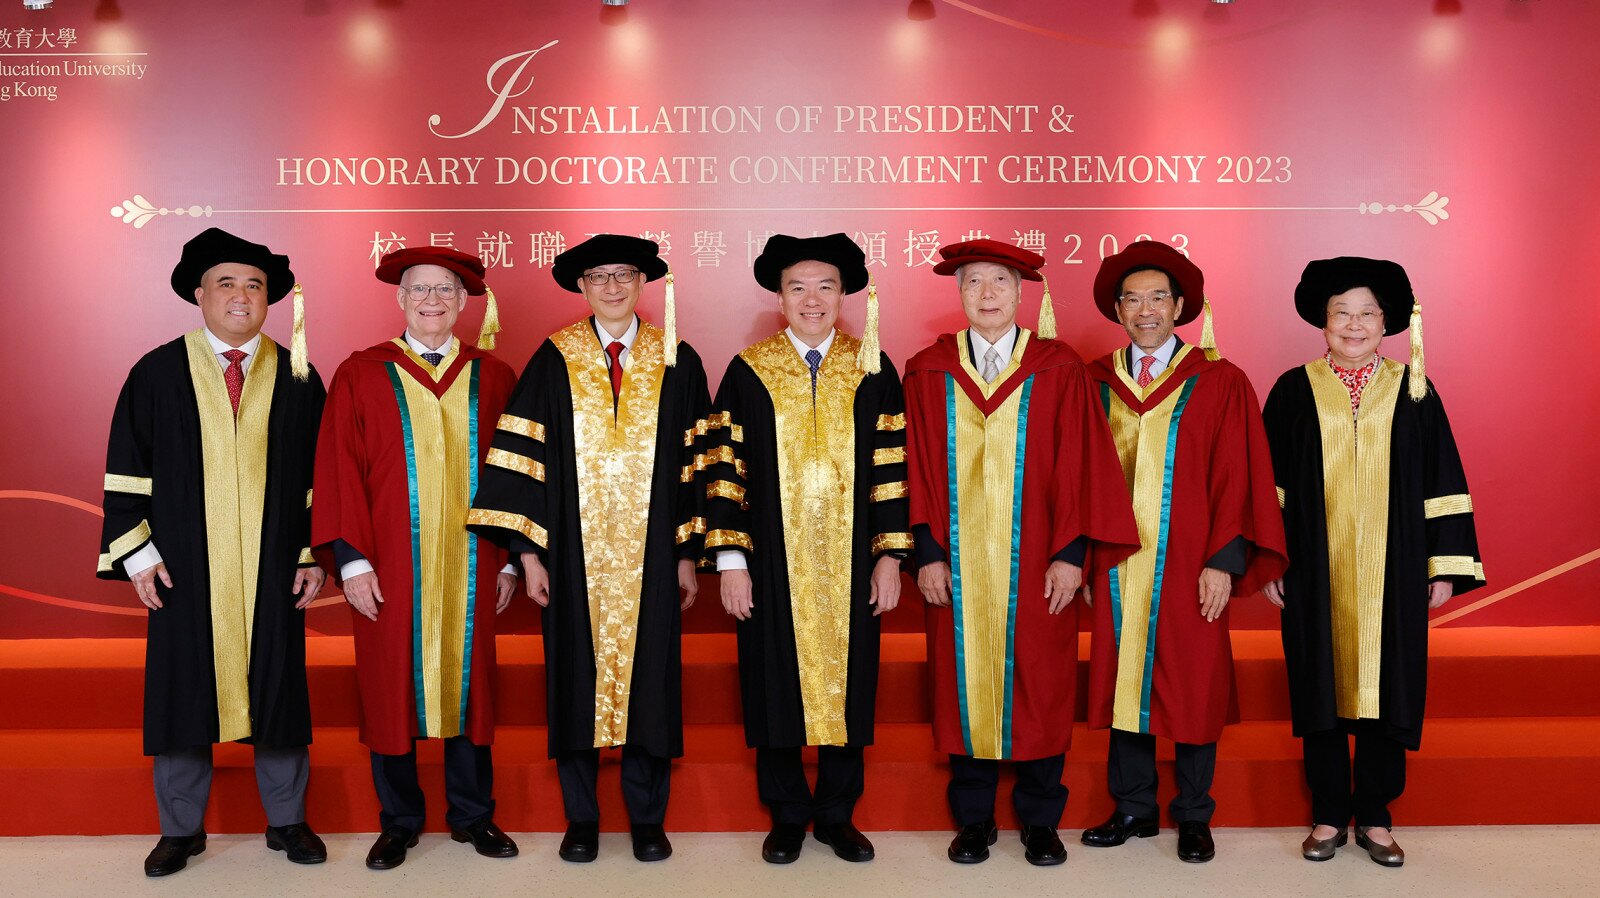 Honorary Doctorate Conferment Ceremony (2023)